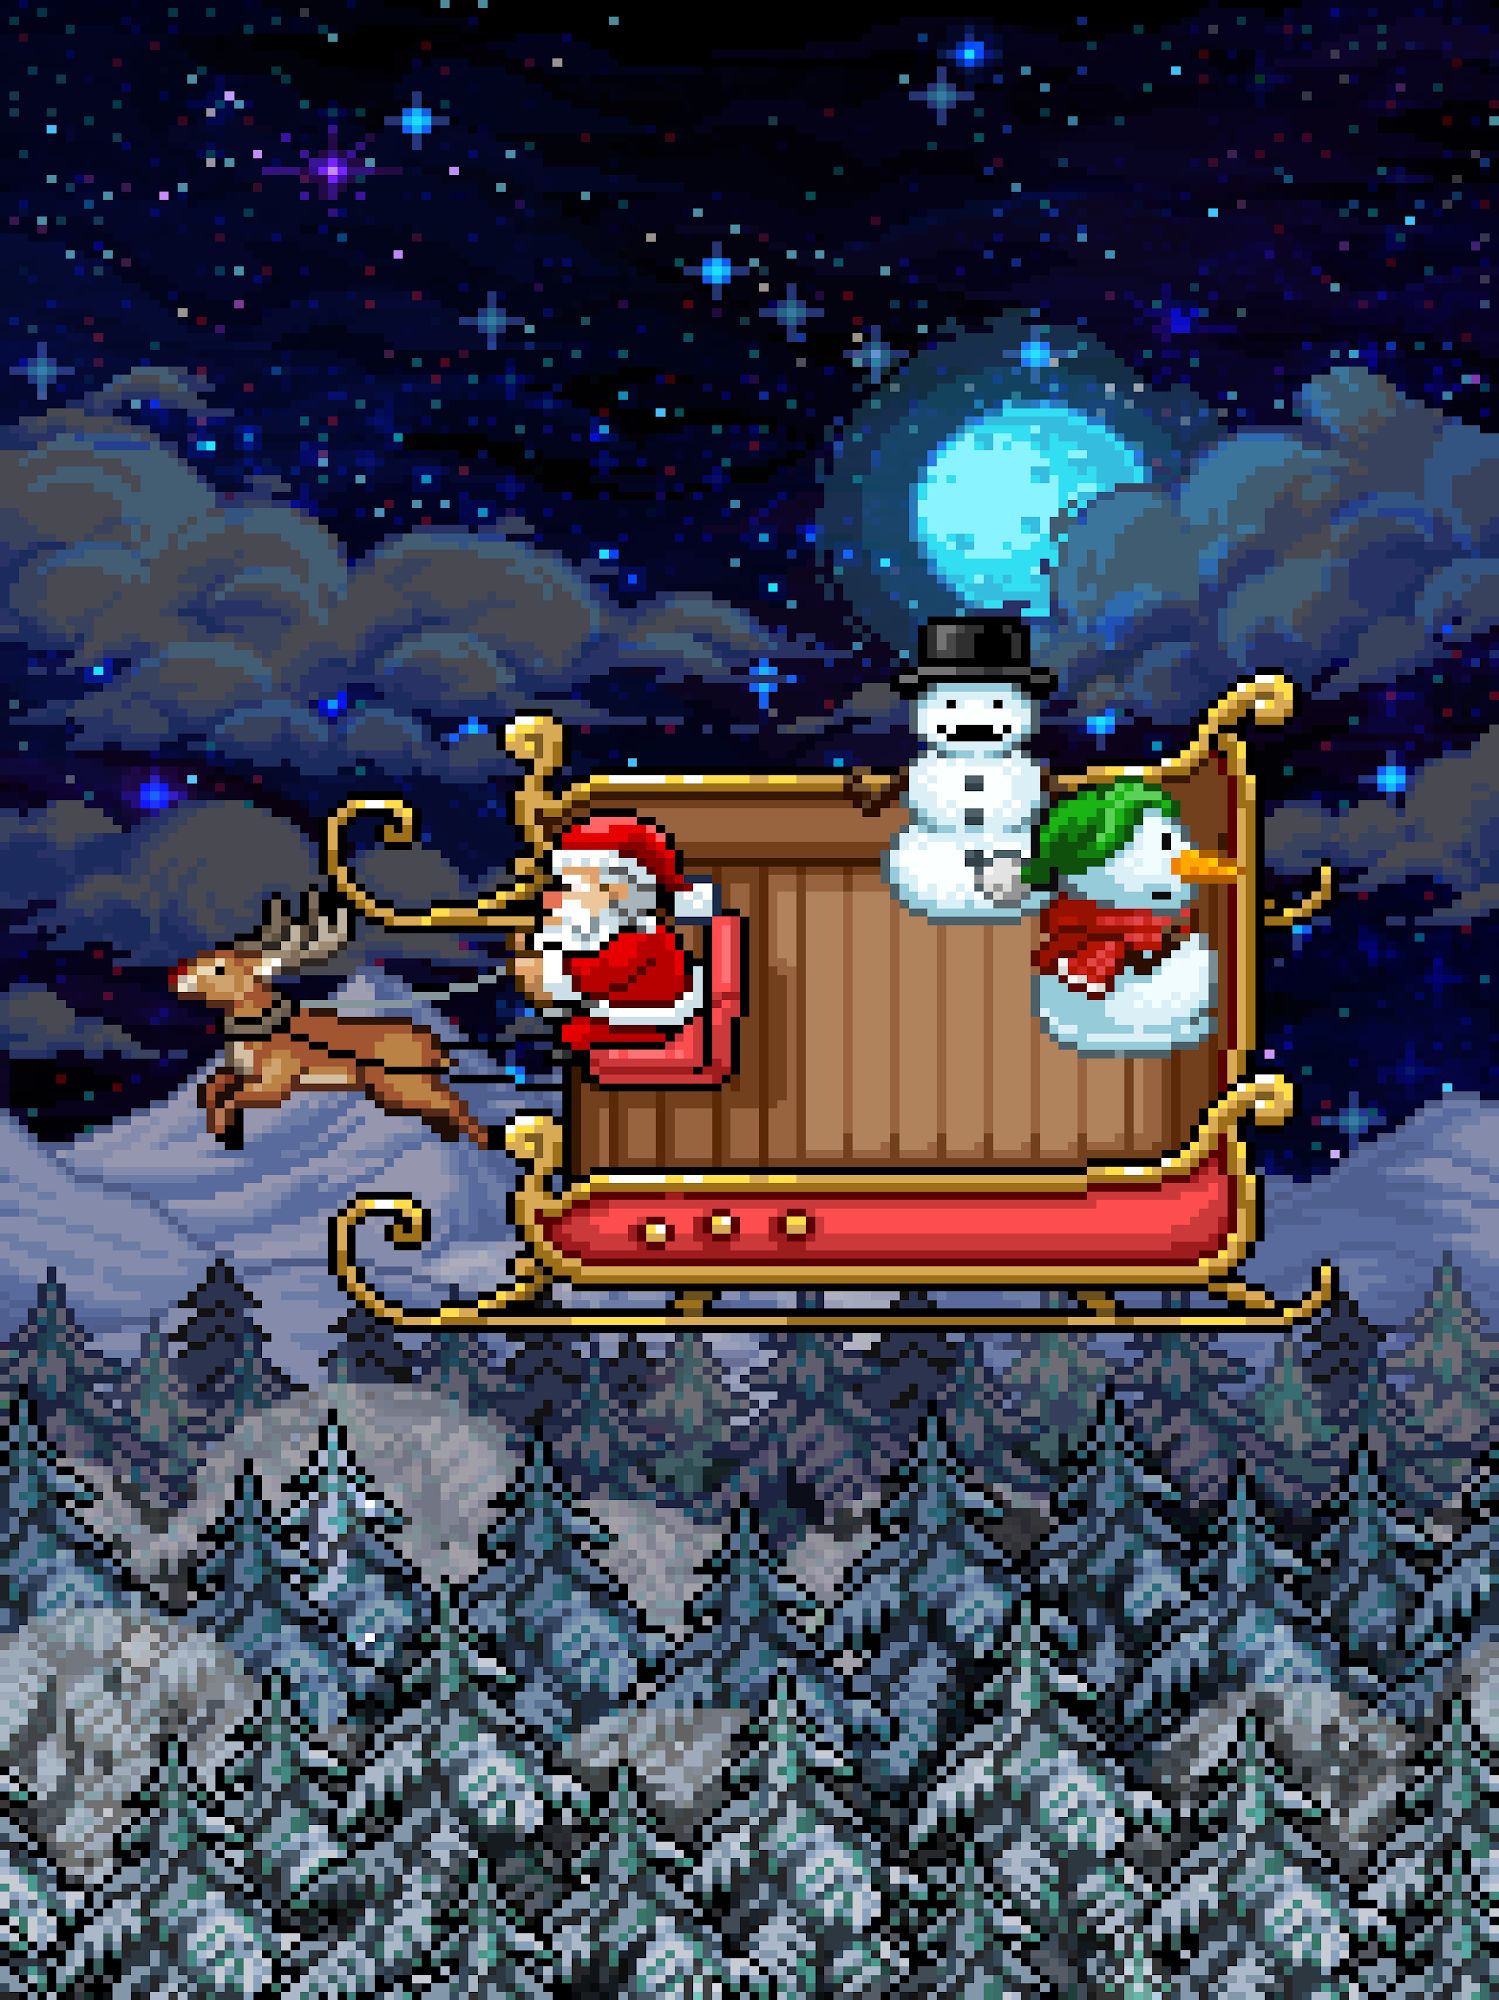 Snowman Story - Android game screenshots.